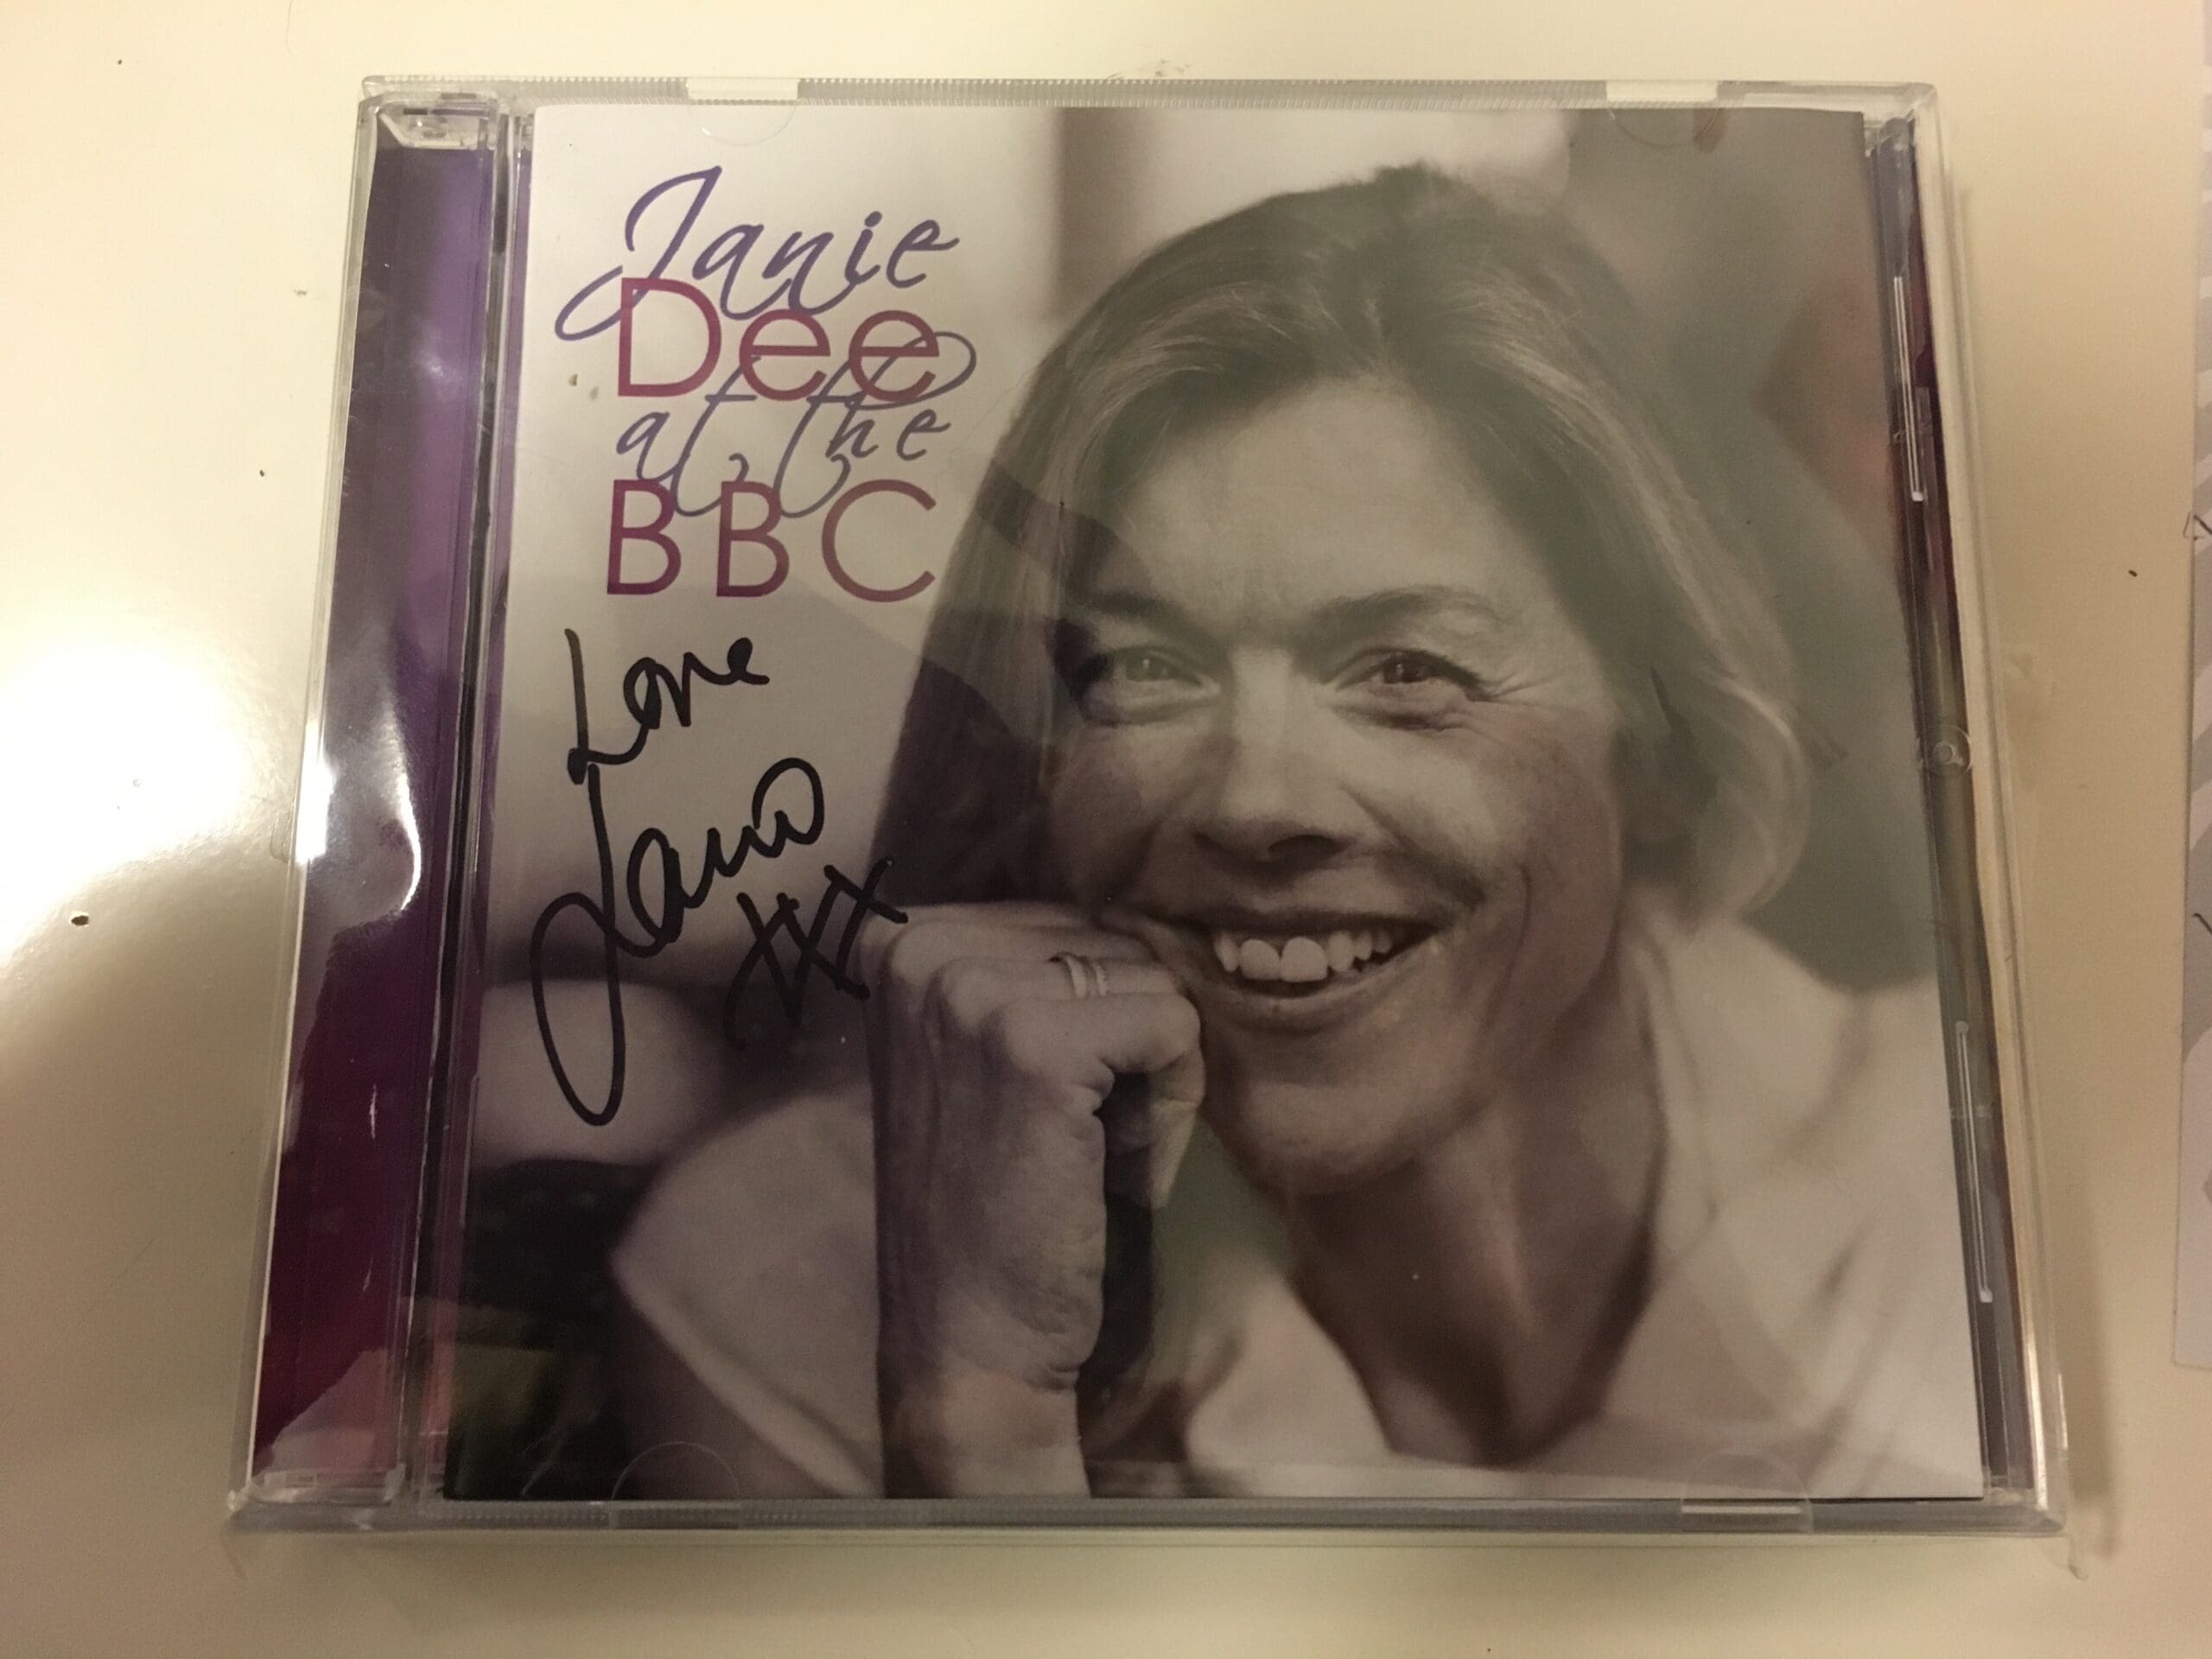 Janie Dee at the bbc cd